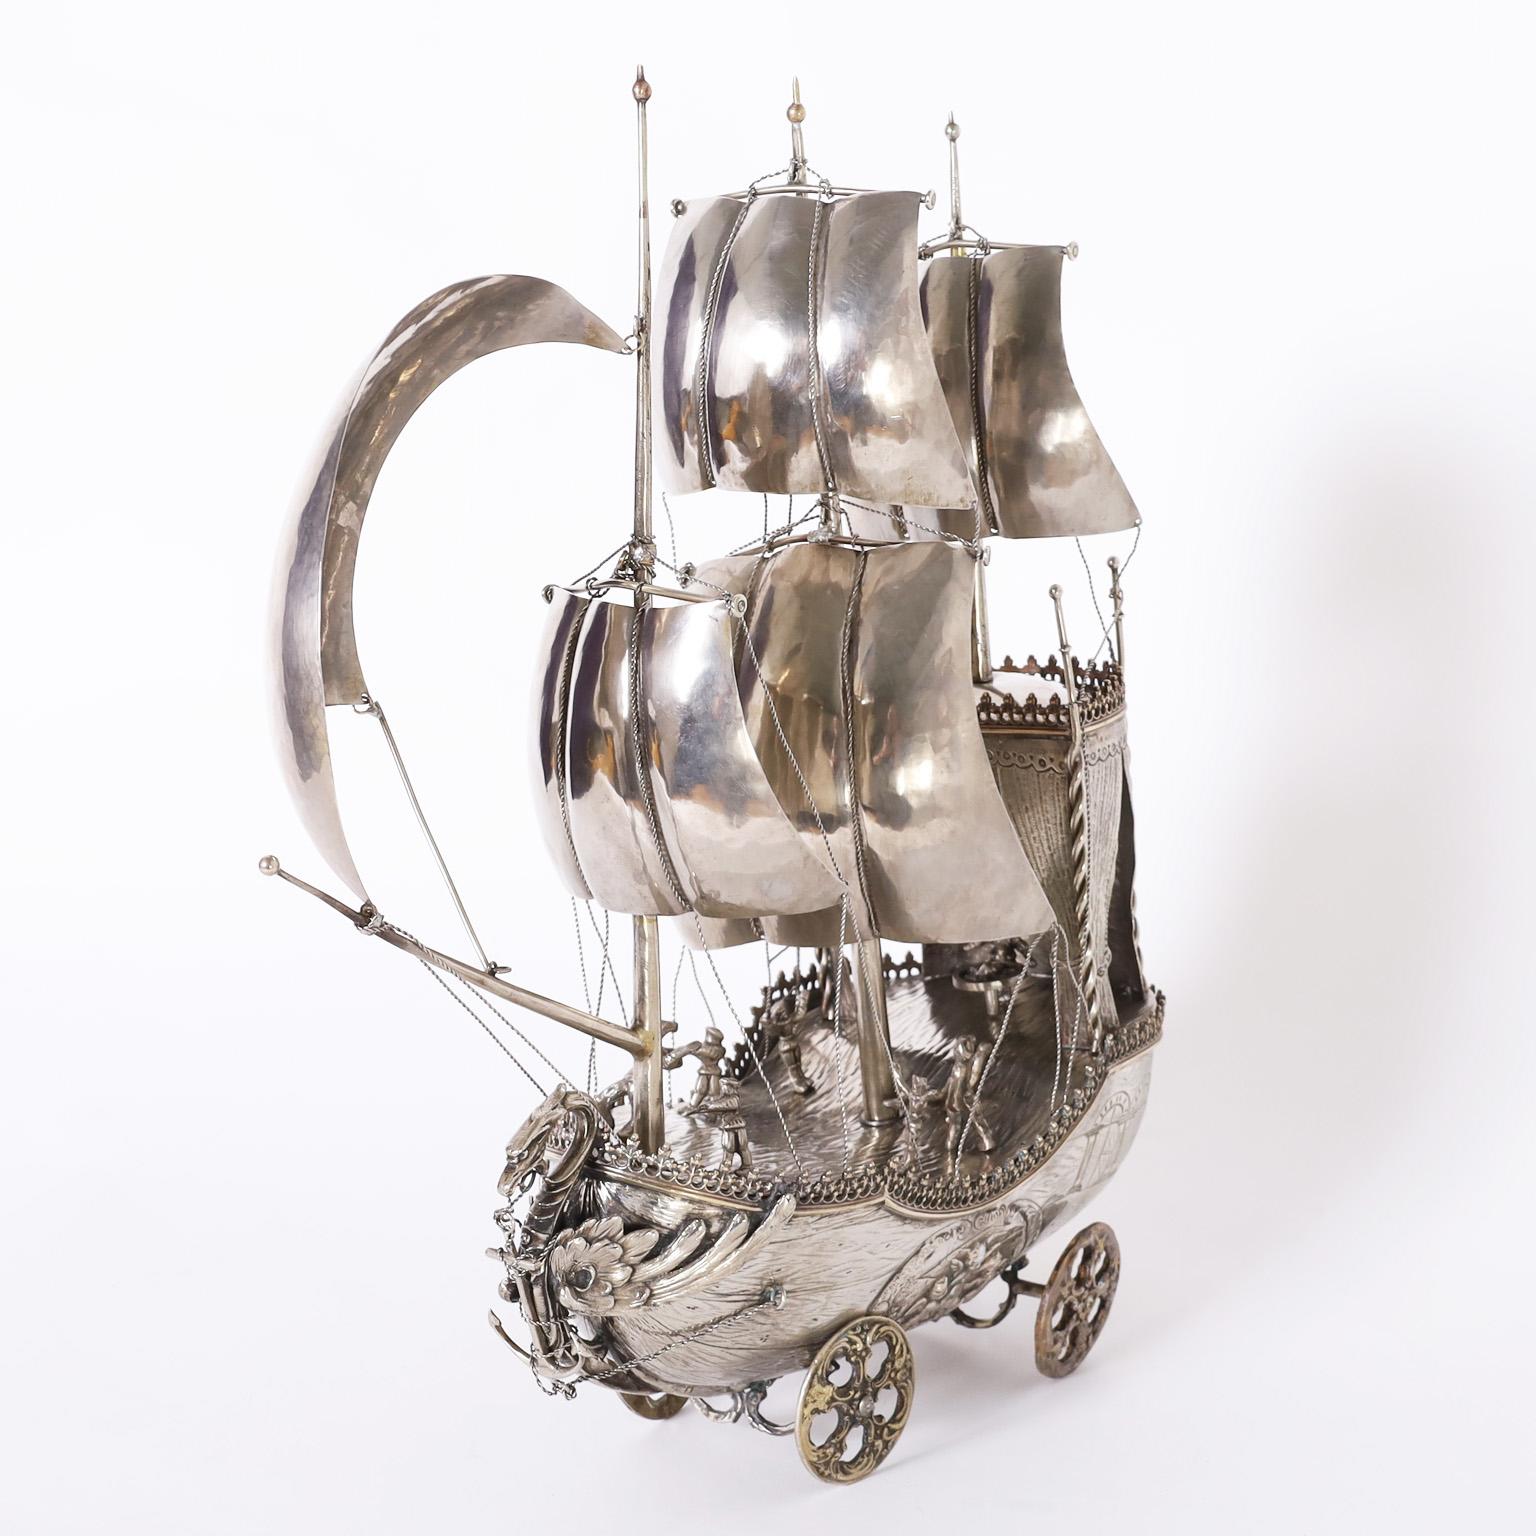 Other Antique Italian Silver on Brass Sailing Ship on Wheels For Sale